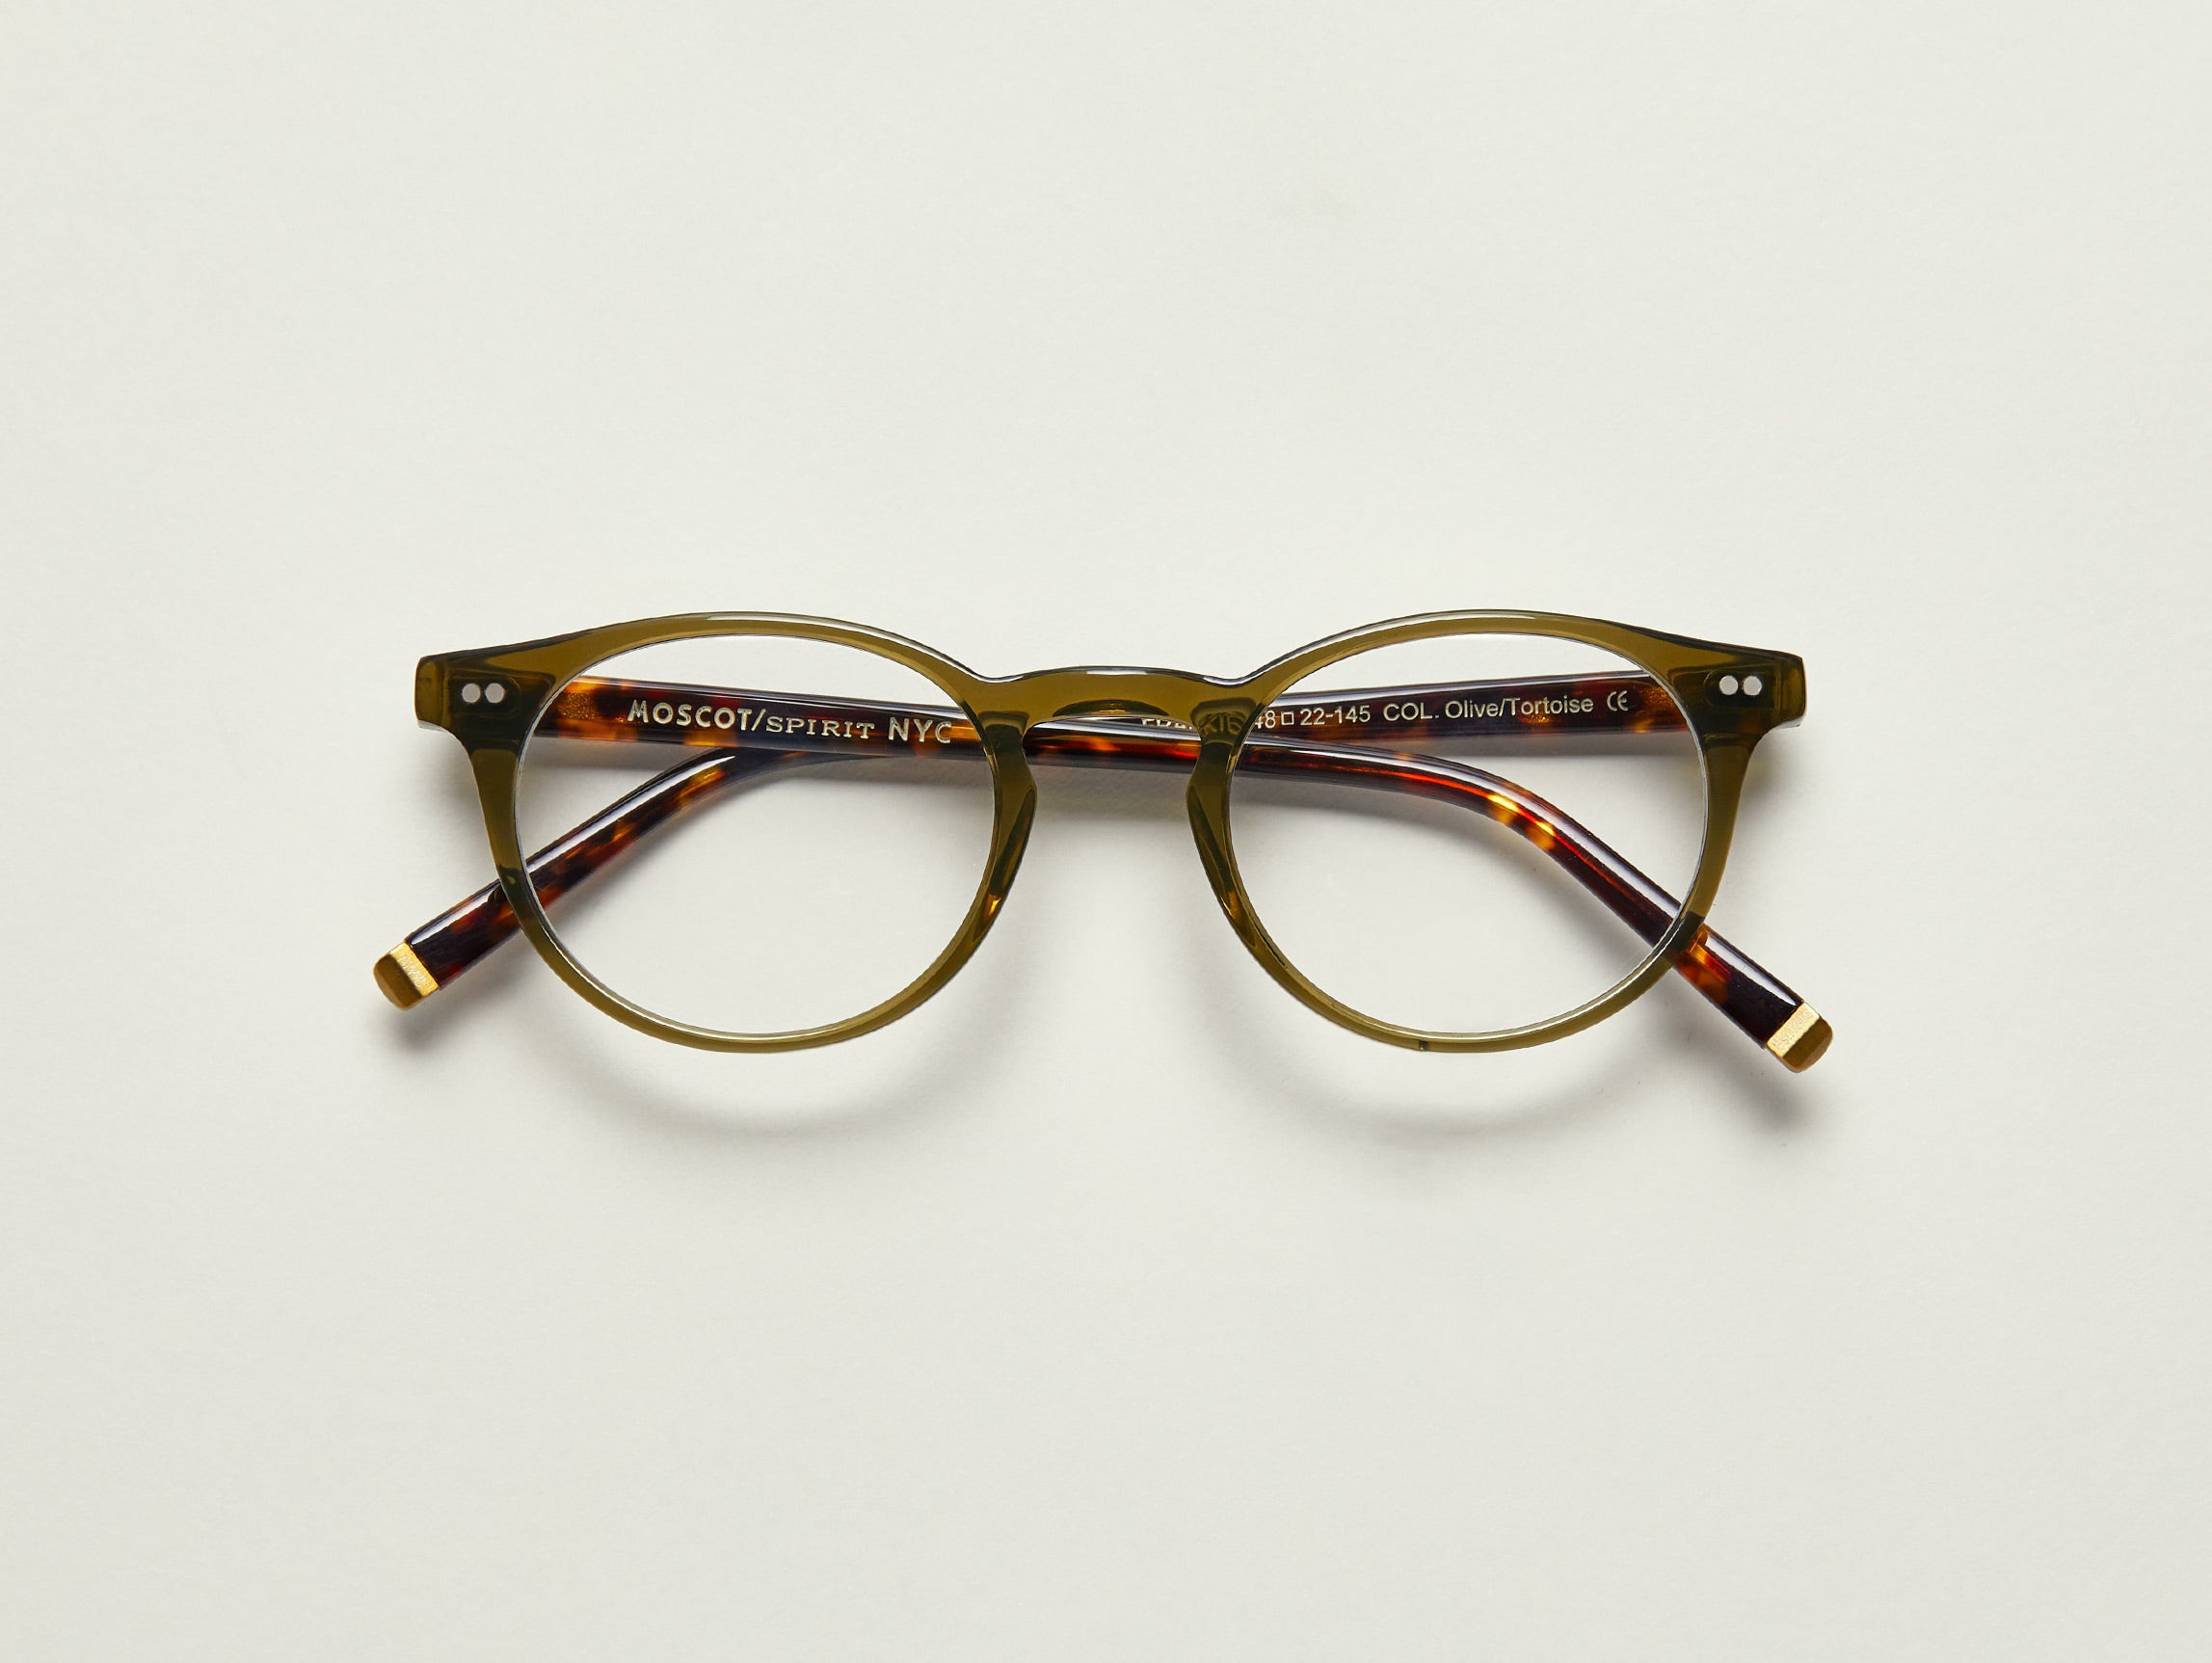 #color_olive/tortoise | The FRANKIE in Olive/Tortoise